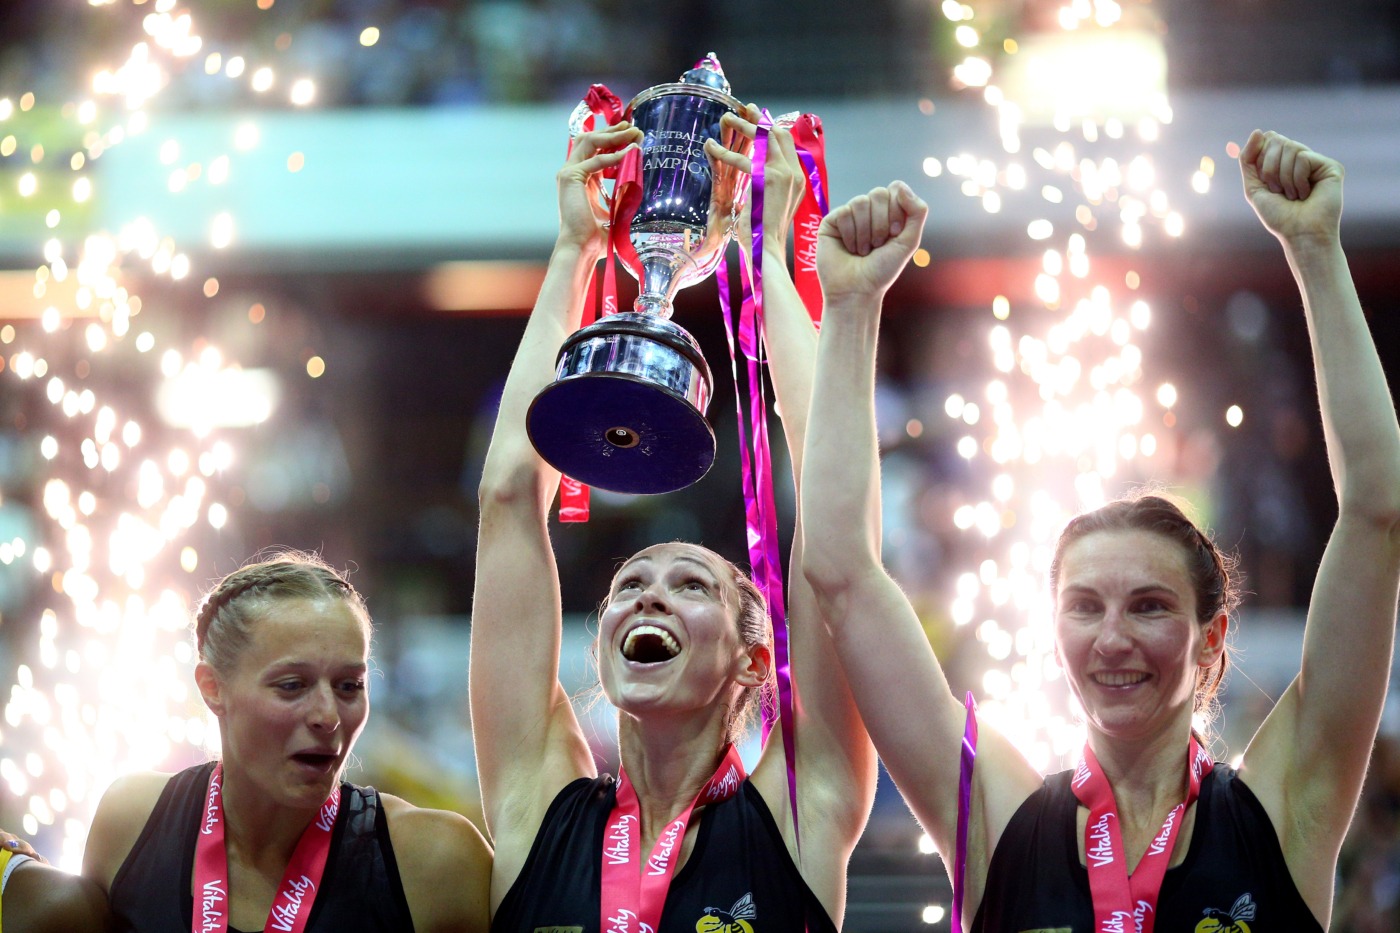 Image: Wasps Netball Press Release